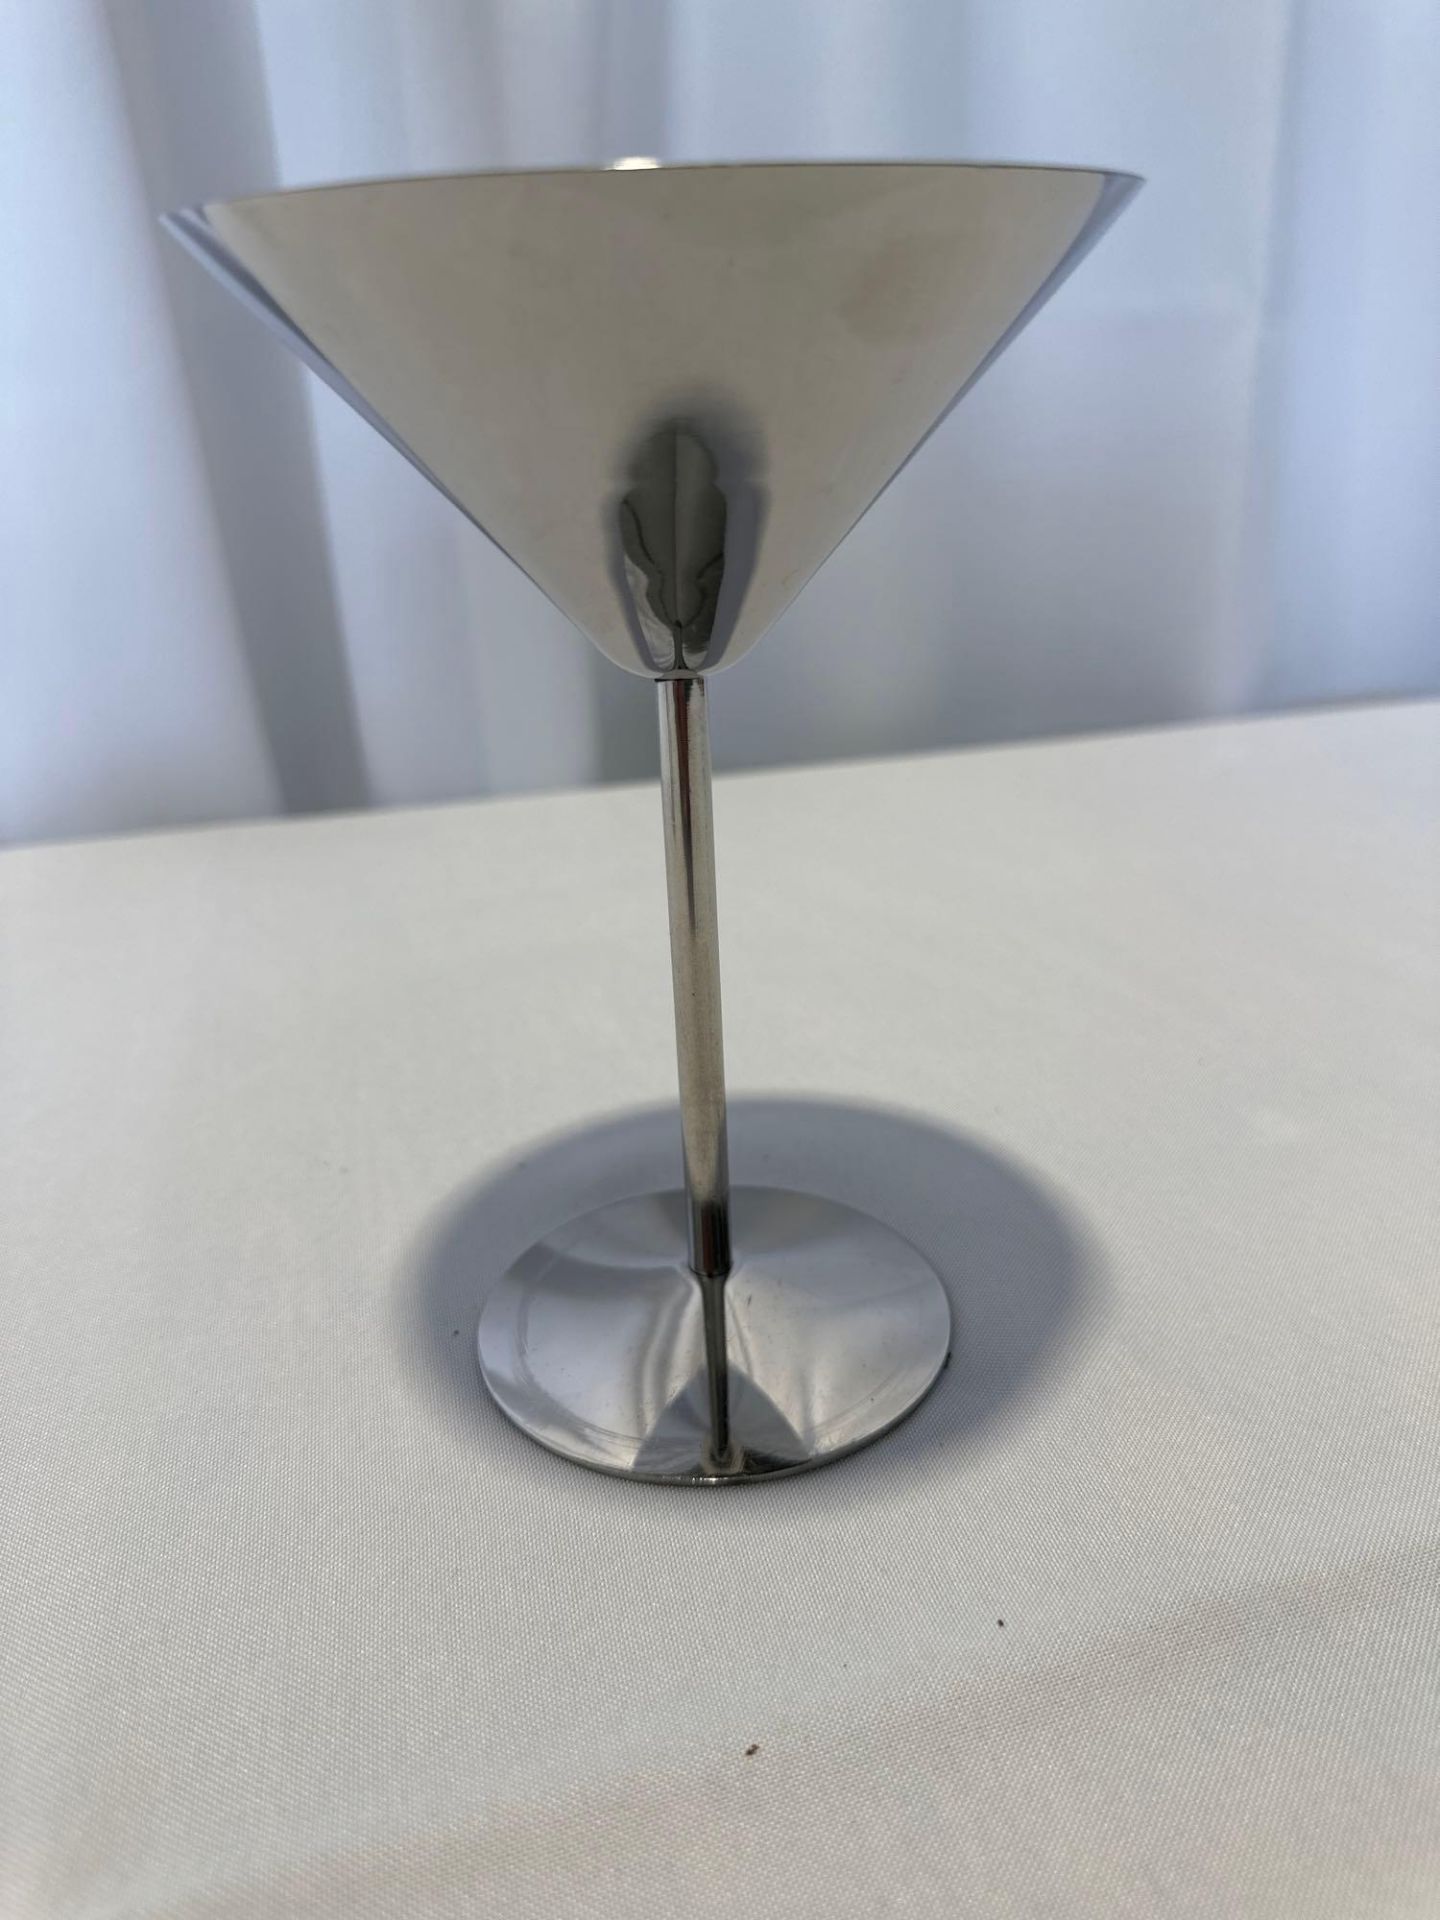 7oz Stainless Martini (crate chargers 5 X $8 each will be added to your invoice)